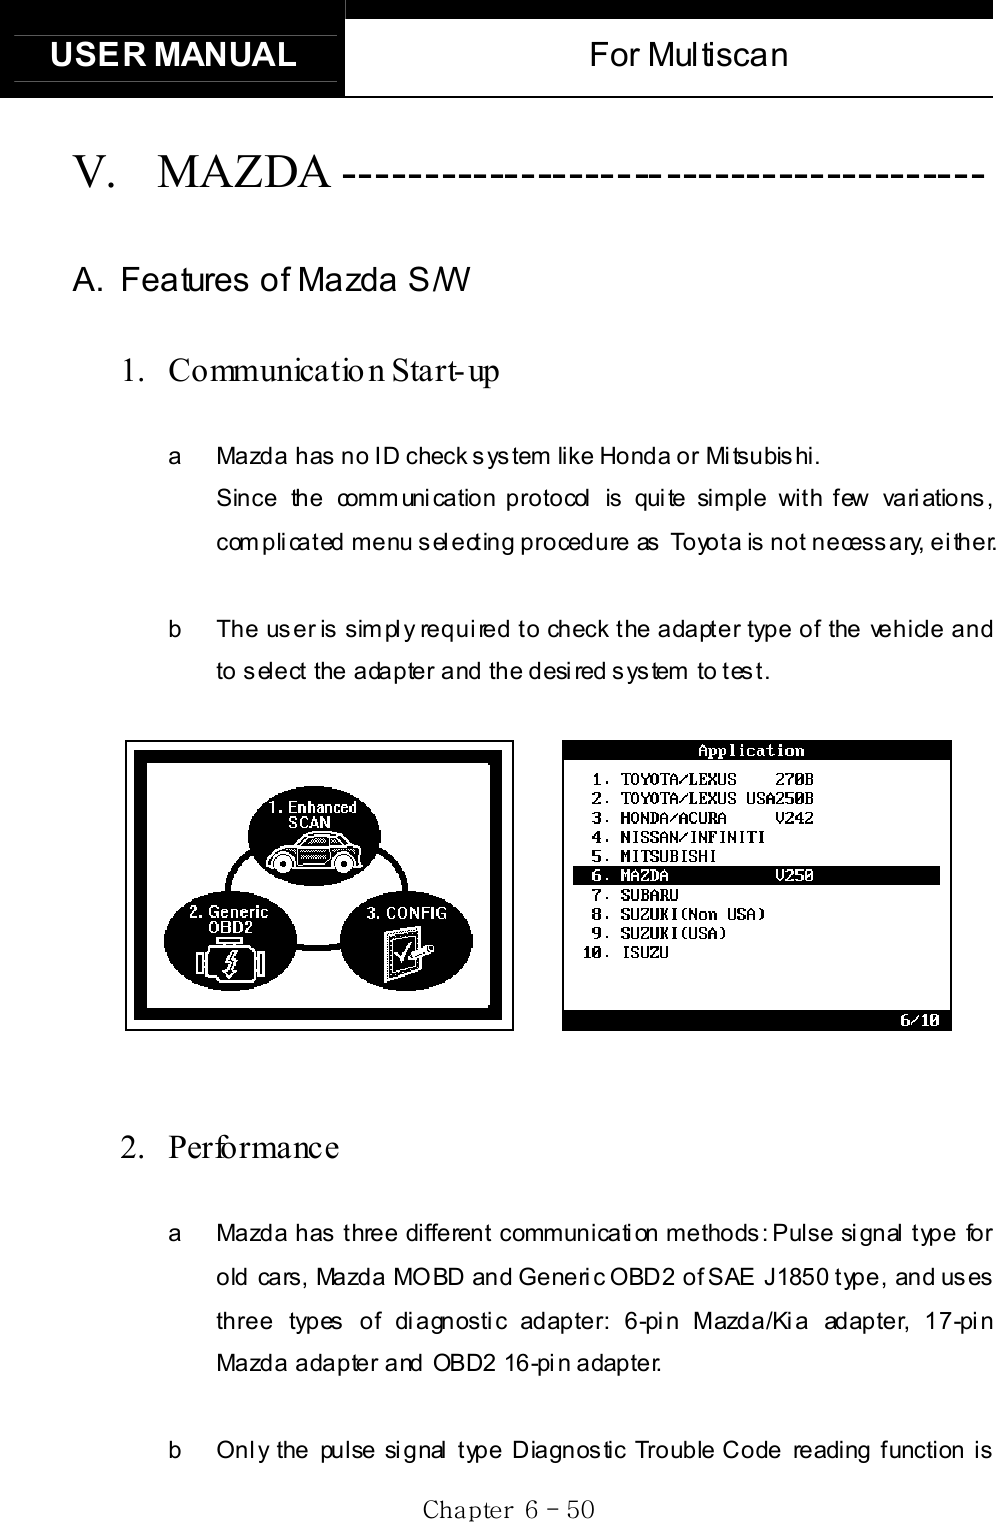 USER MANUAL  For Multiscan Gj G]G TG\WGV. MAZDA ---------------------------------------- A.  Features of Mazda S/W 1. Communicatio n Start-up a  Mazda has no ID check system like Honda or Mitsubishi.   Since the communication protocol is quite simple with few variations, complicated menu selecting procedure as Toyota is not necessary, either. b  The user is simply required to check the adapter type of the vehicle and to select the adapter and the desired system to test.       2. Performance a  Mazda has three different communication methods: Pulse signal type for old cars, Mazda MOBD and Generic OBD2 of SAE J1850 type, and uses three types of diagnostic adapter: 6-pin Mazda/Kia adapter, 17-pin Mazda adapter and OBD2 16-pin adapter. b  Only the pulse signal type Diagnostic Trouble Code reading function is 